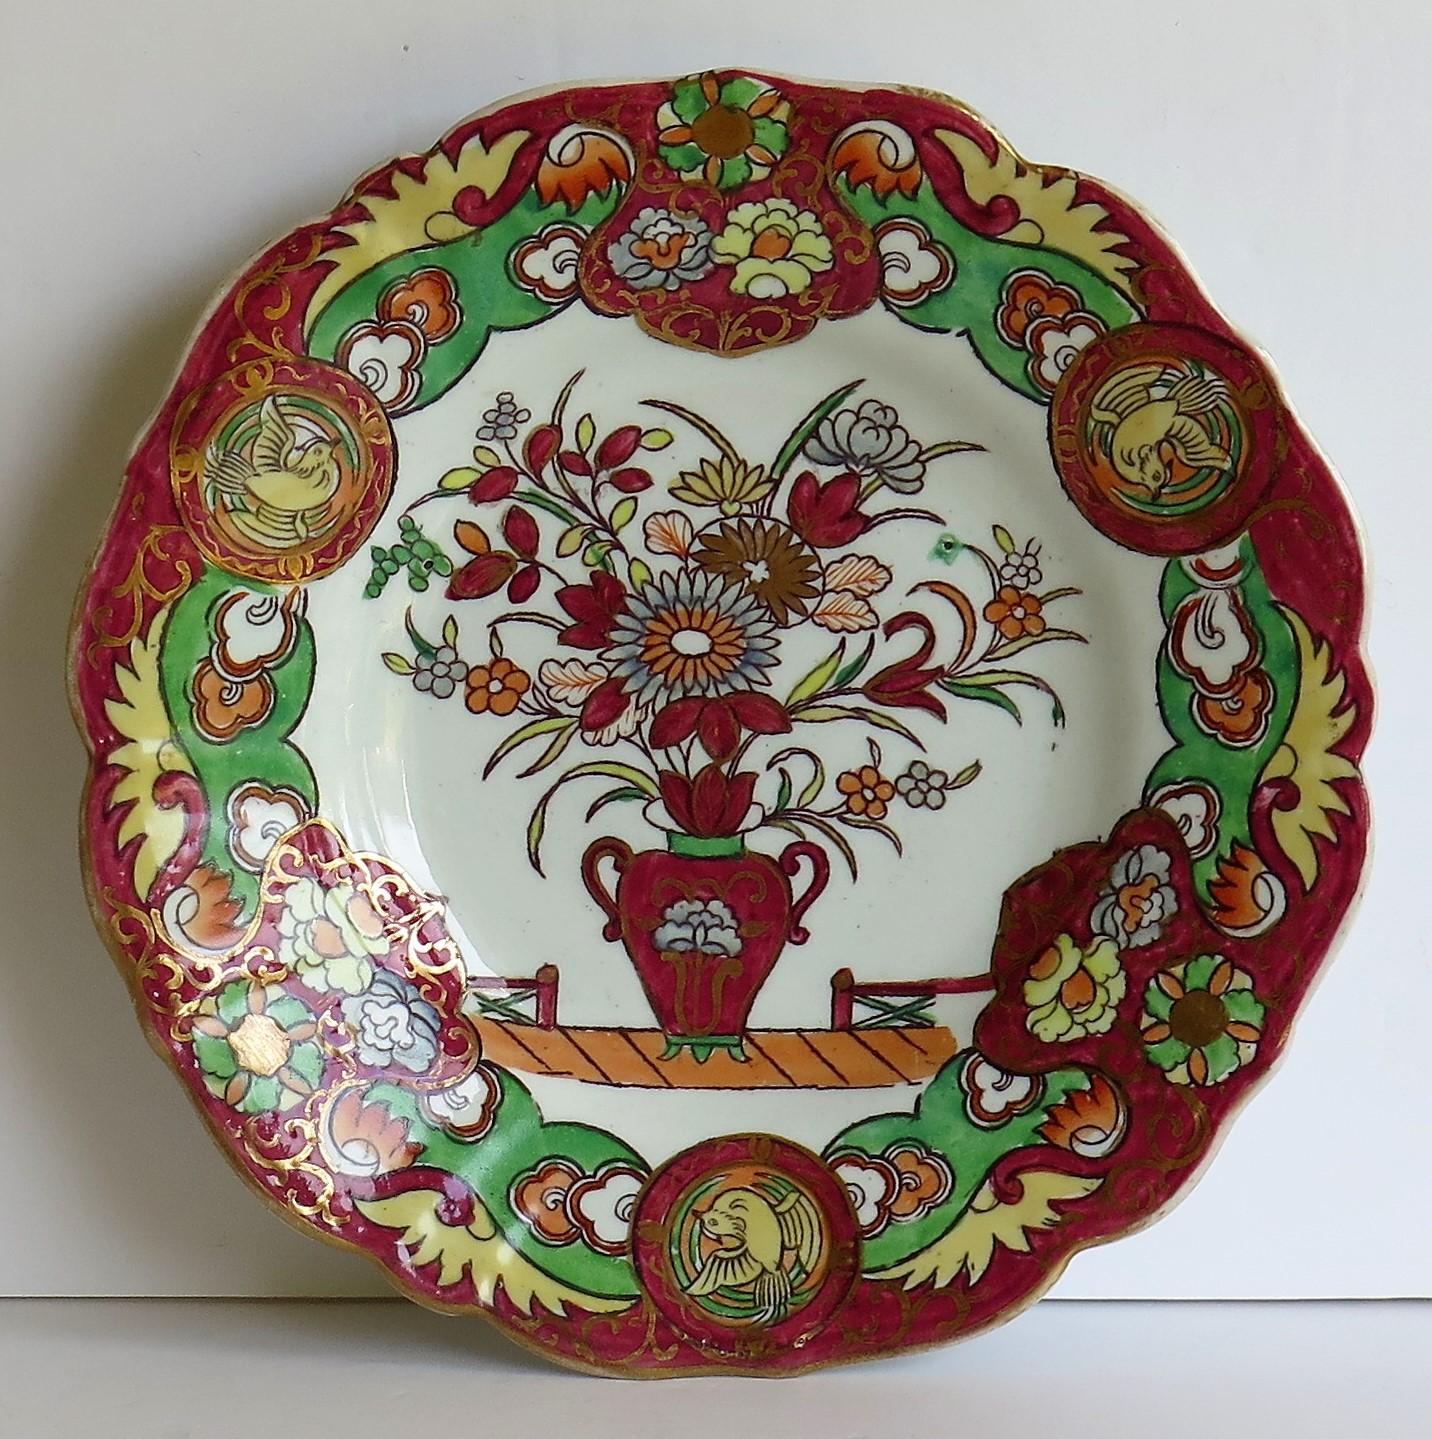 English Mason's Ironstone Desert Dish or Plate in Fence Vase and Doves Pattern, Ca 1830